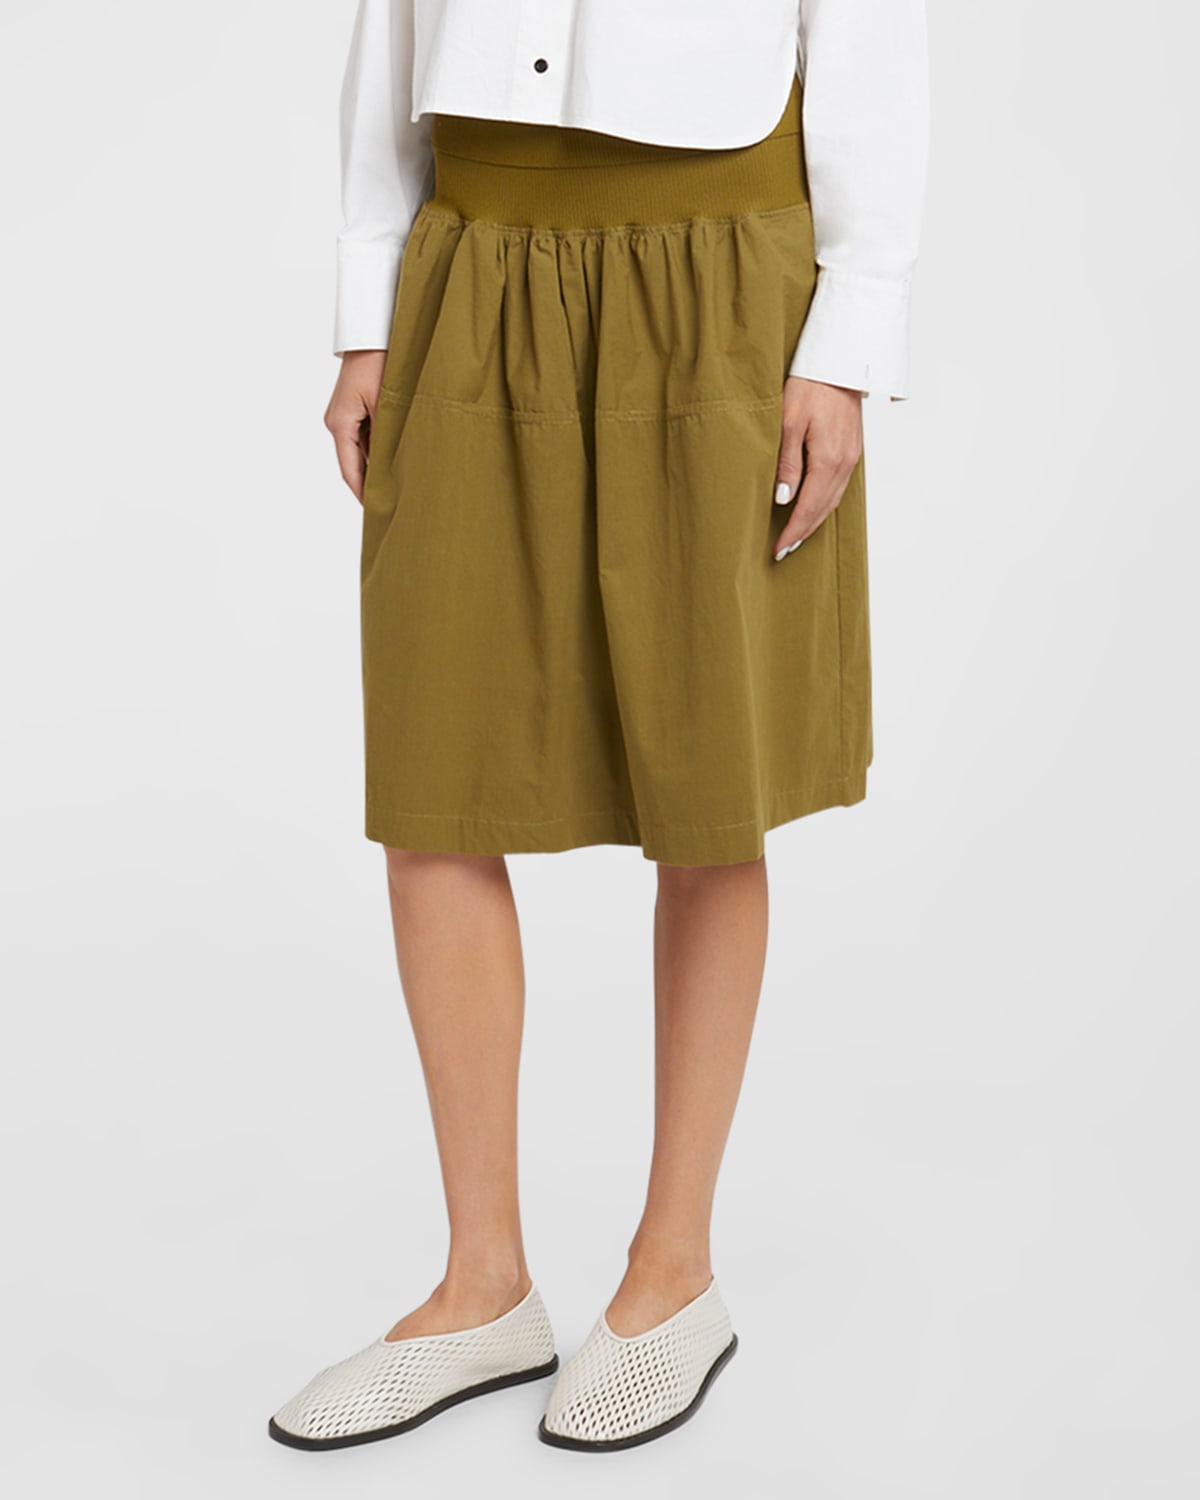 Shop Proenza Schouler White Label Olive Pull-on Skirt